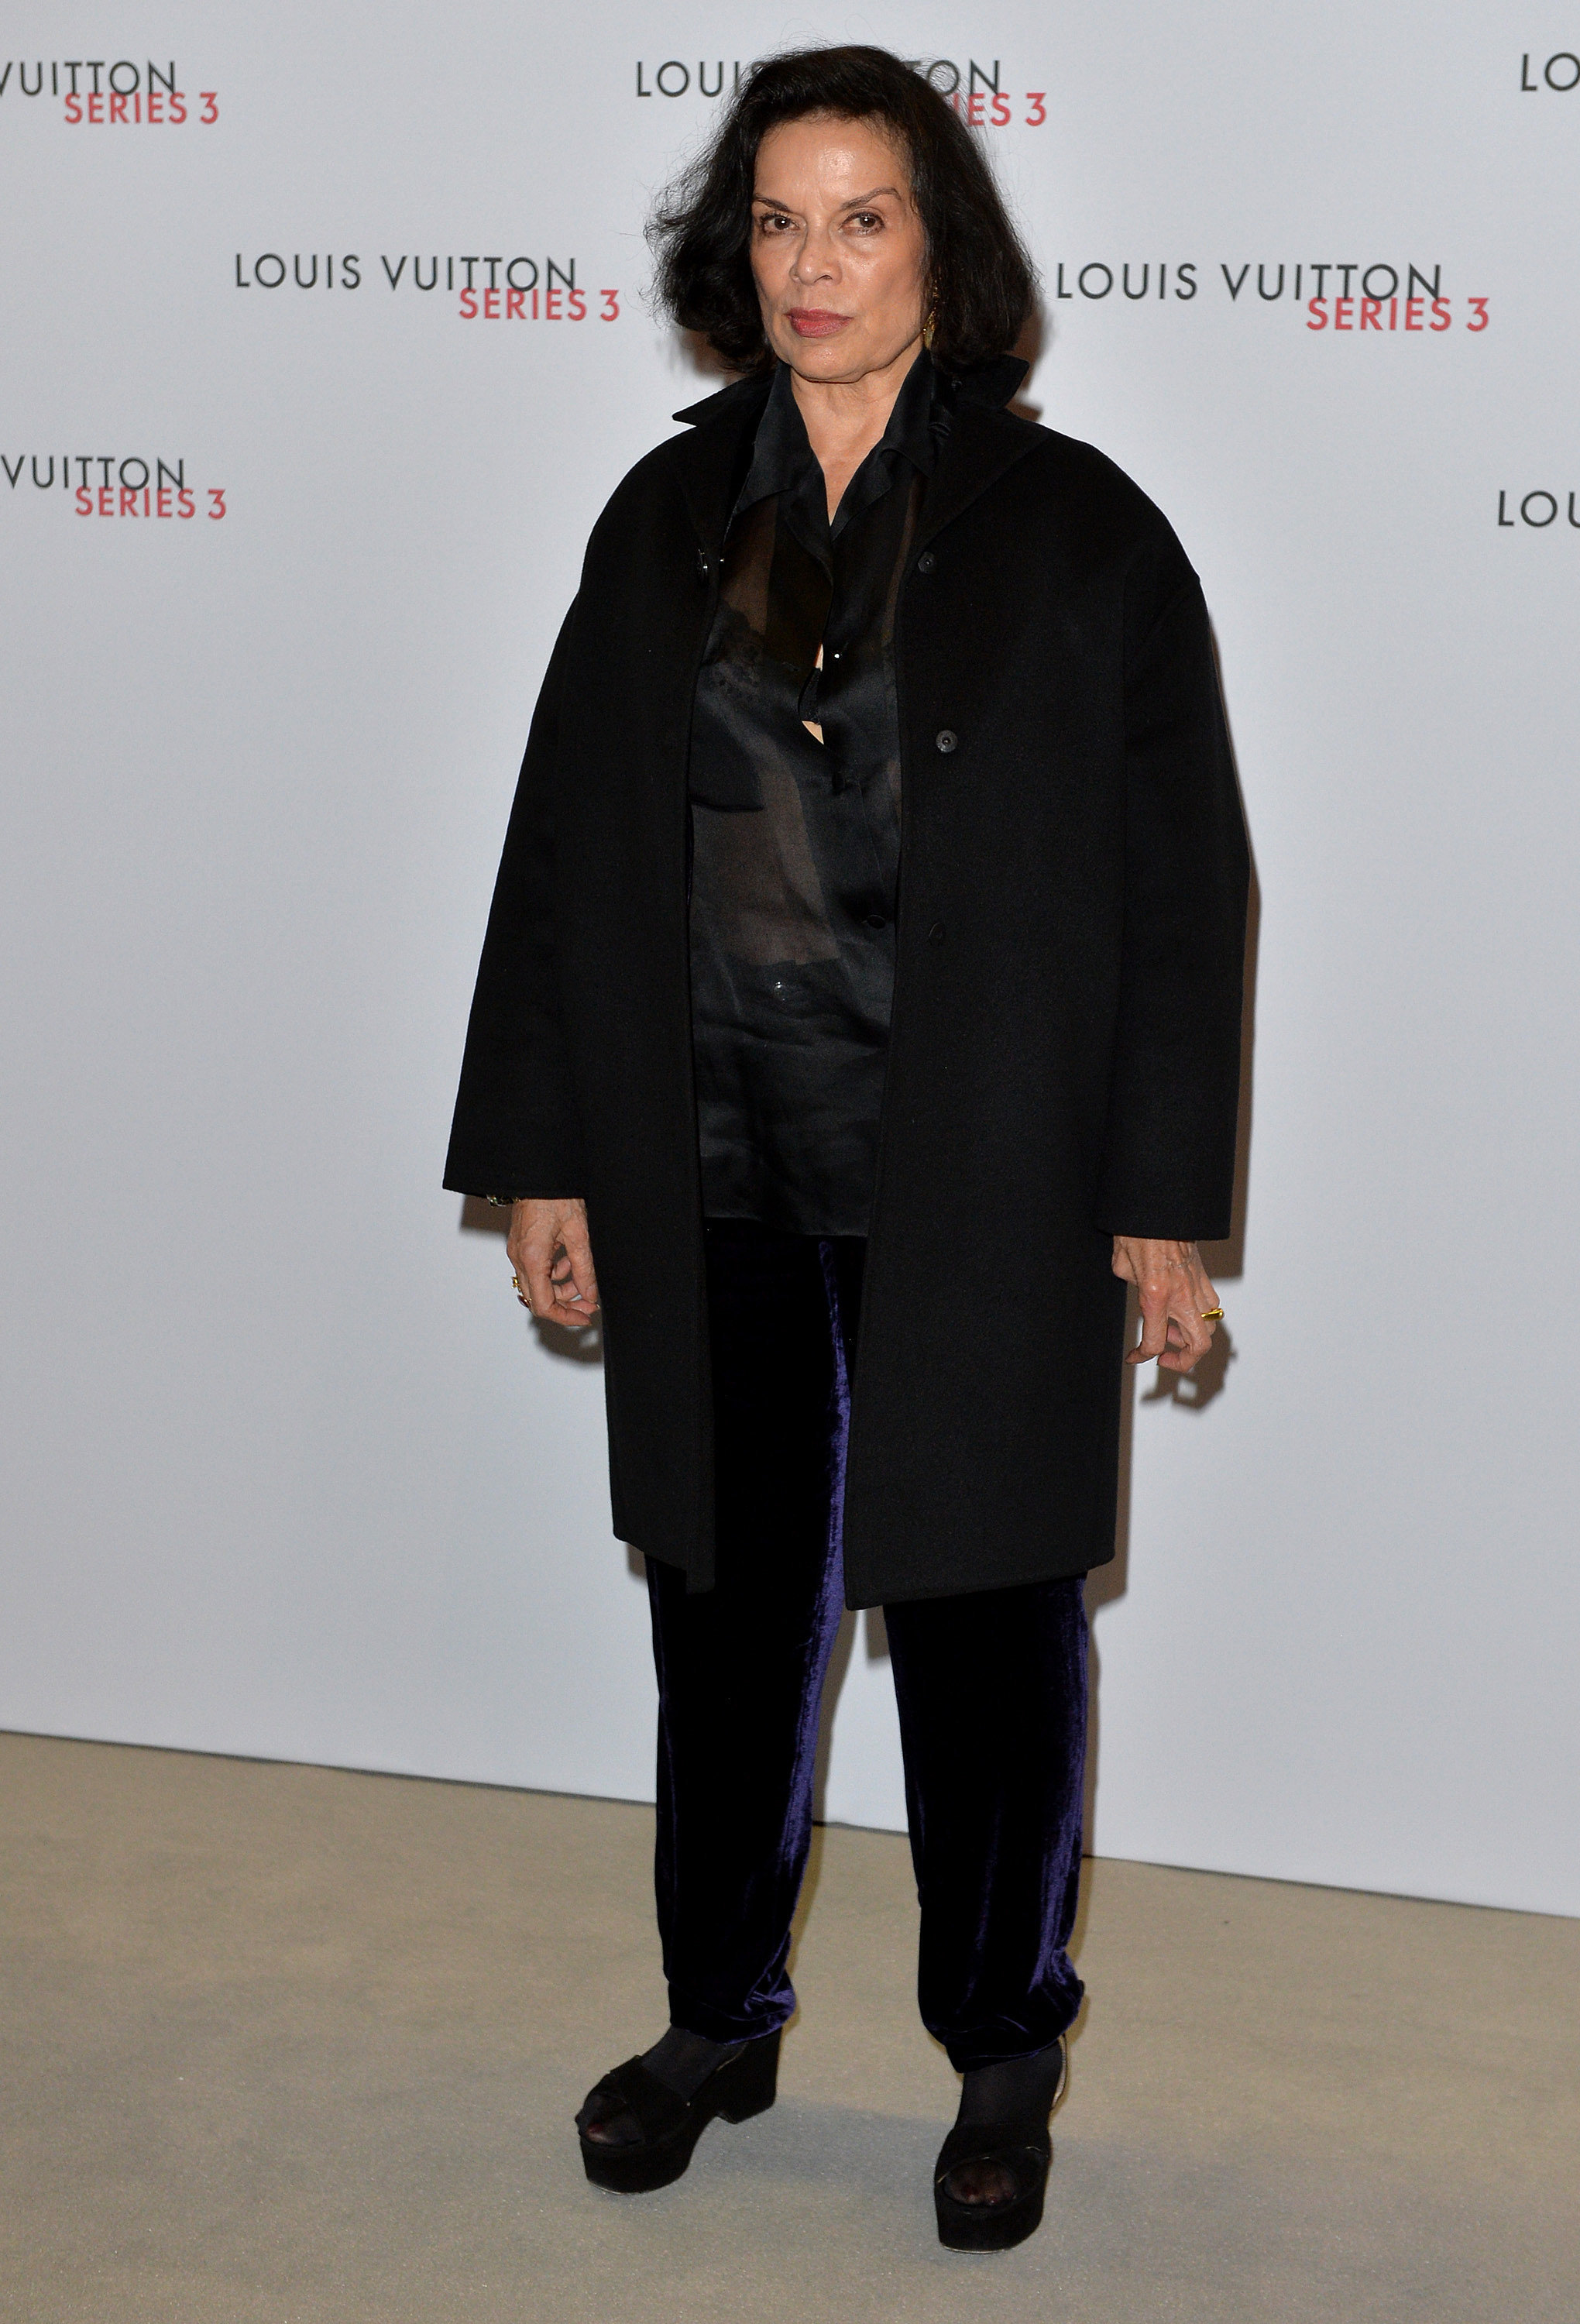 Bianca Jagger photo gallery - 80 high quality pics of Bianca Jagger ...